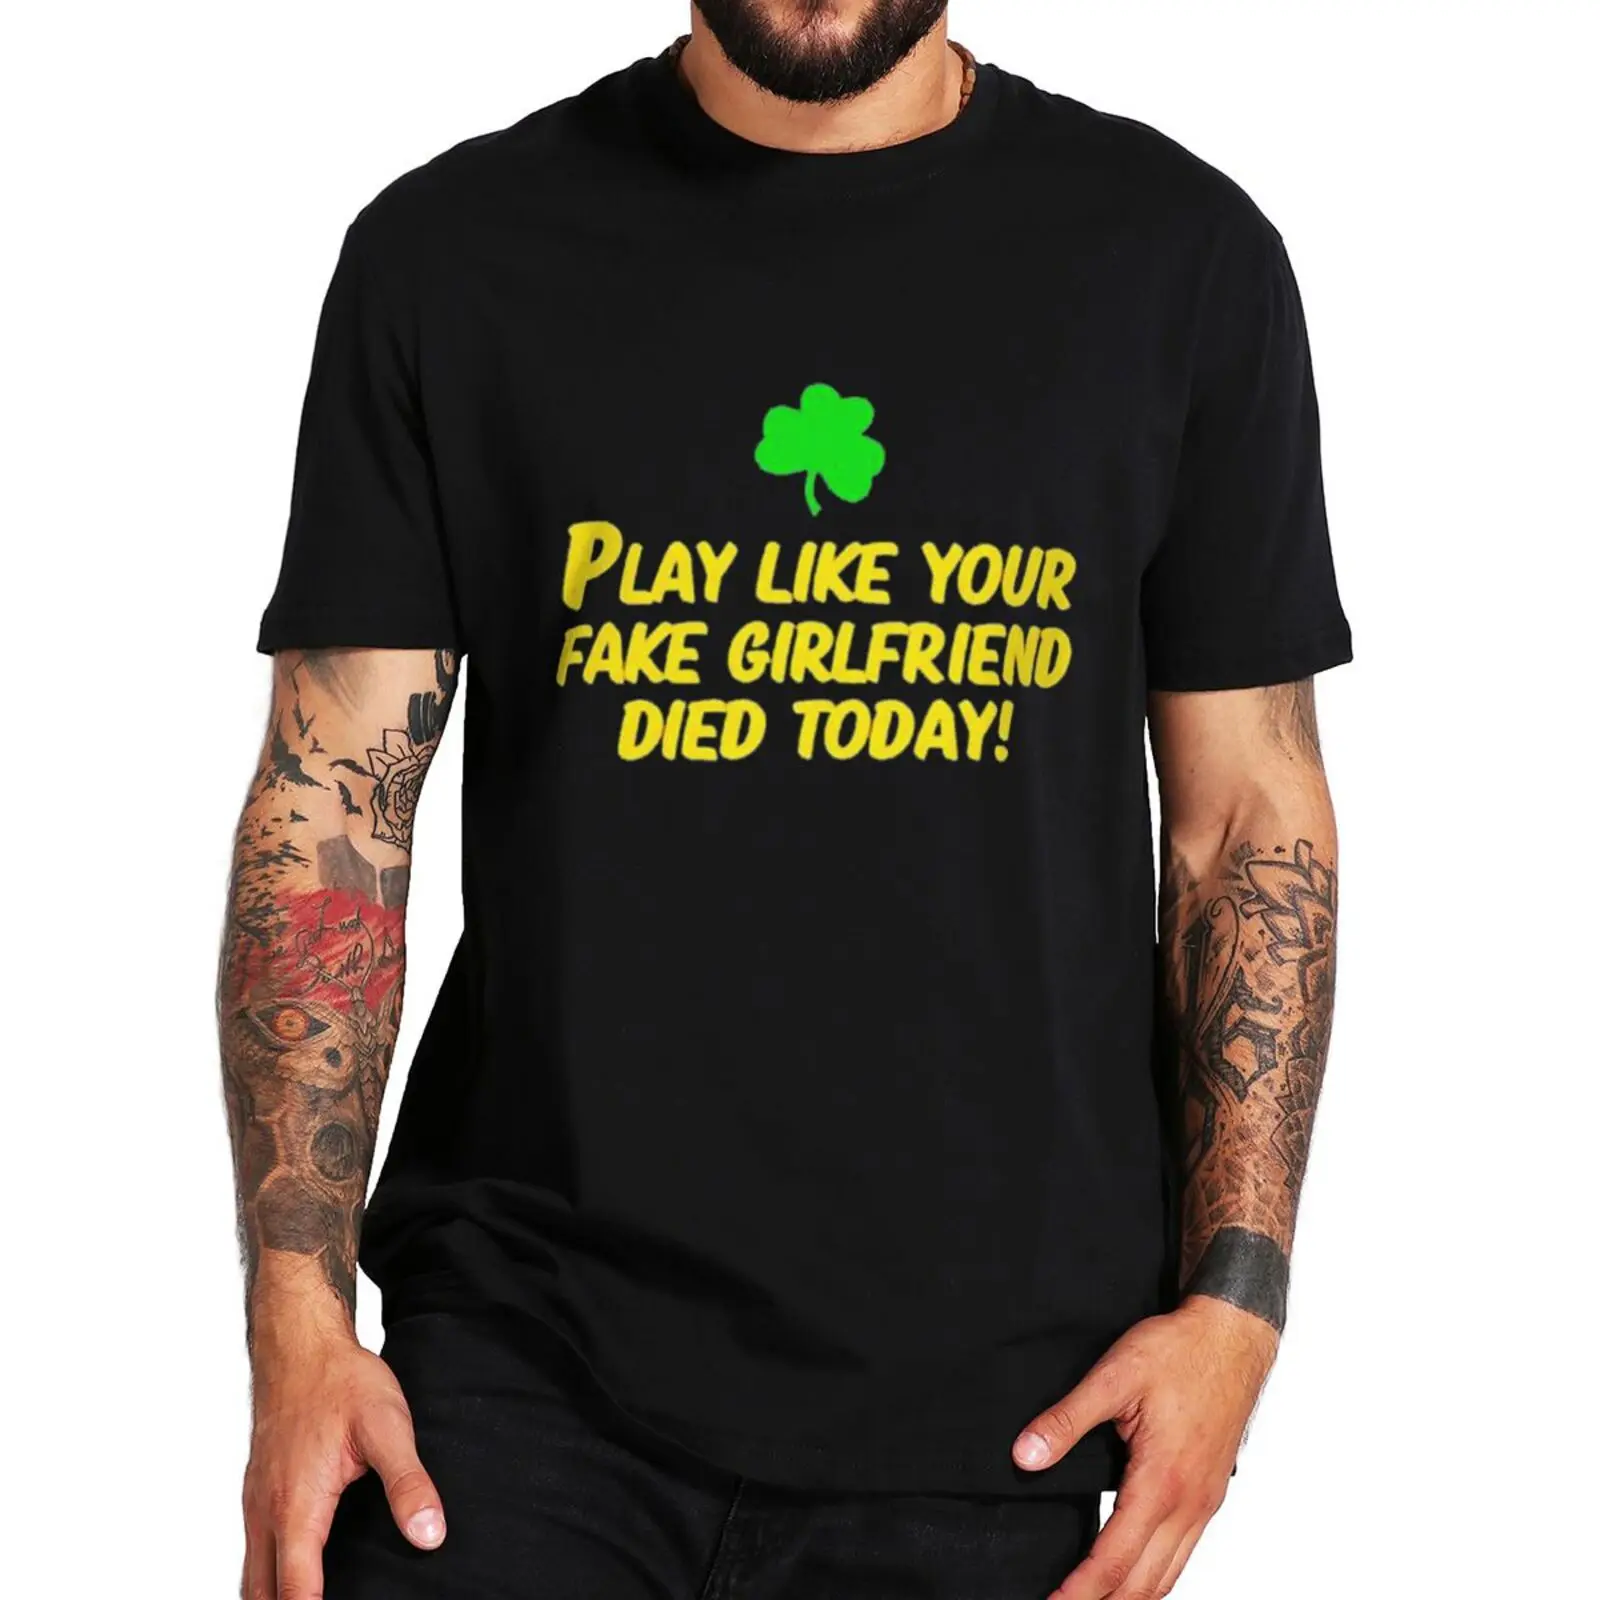 

Play Like Your Girlfriend Died Today T-shirt Funny Meme Hipster Humor Short Sleeve Summer Casual Cotton Unisex T Shirts